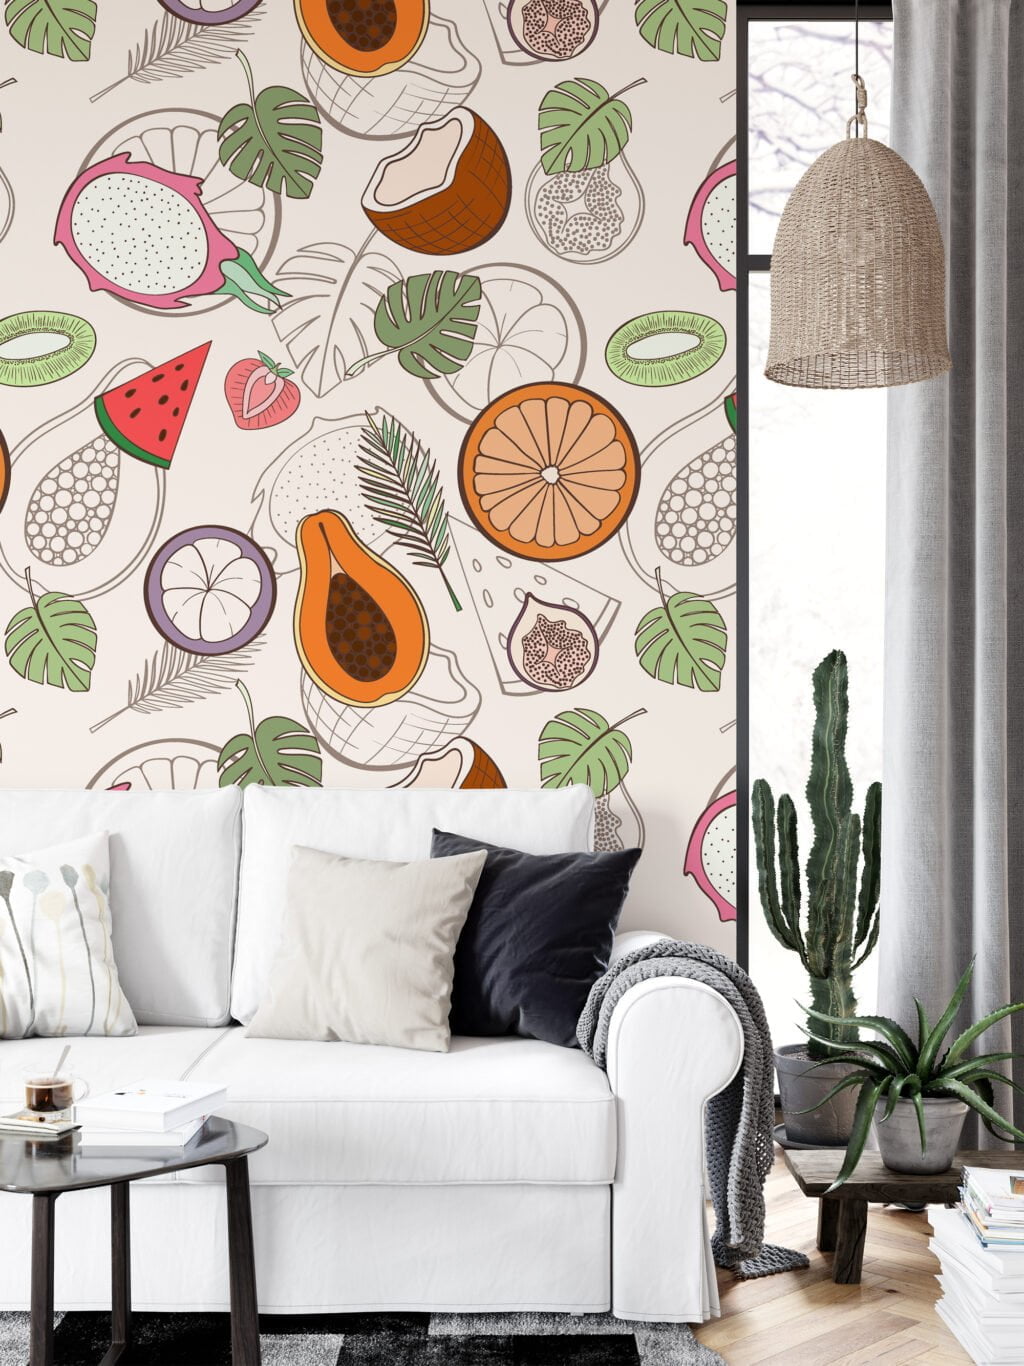 Vegetables And Fruits Illustration Pattern Wallpaper, Whimsical Tropical Fruit Peel & Stick Wall Mural